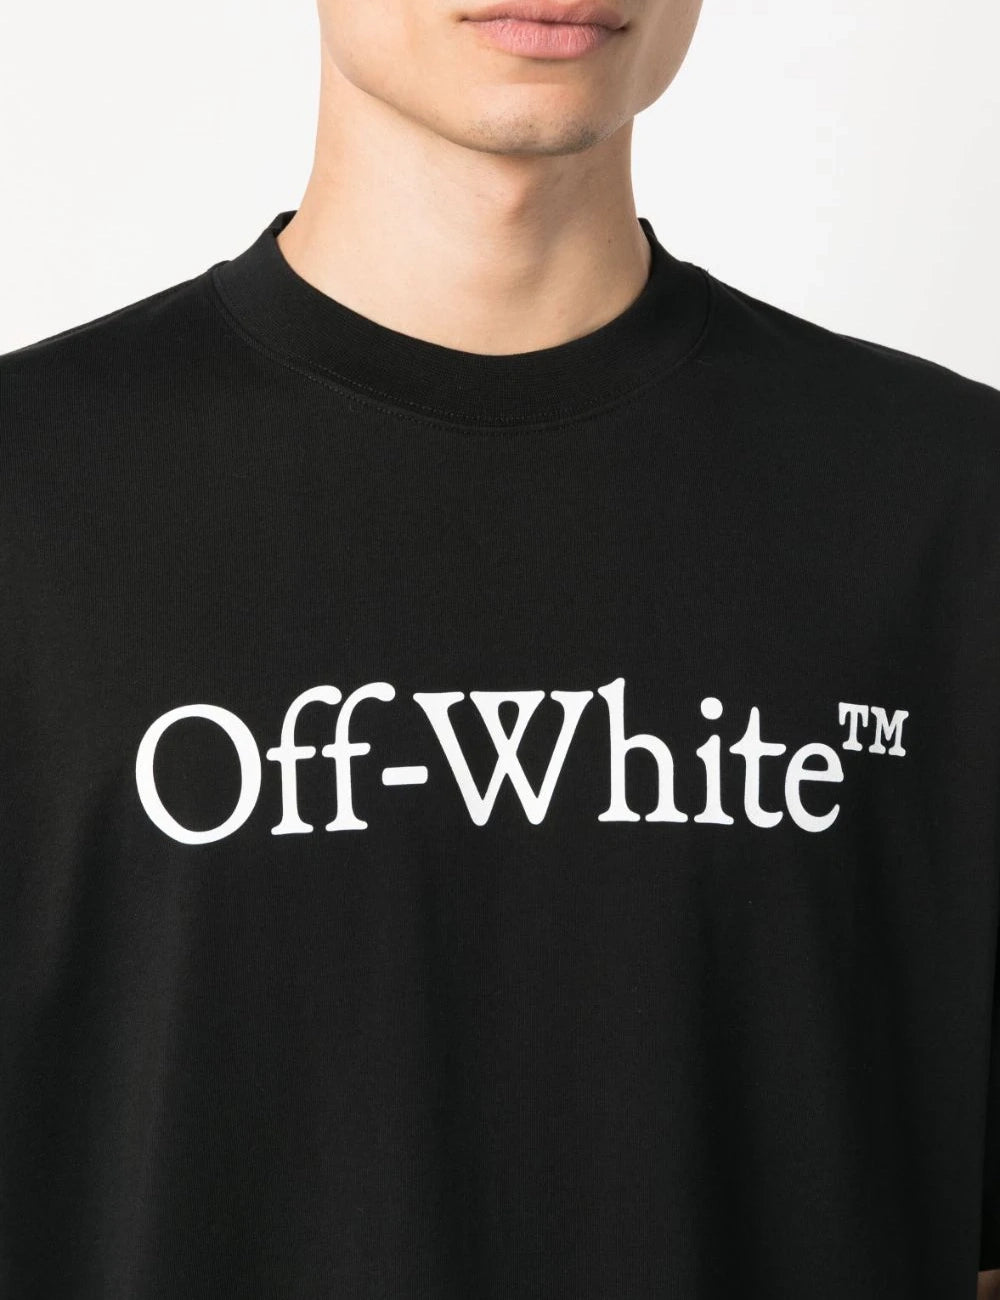 OFF WHITE BIG BOOKISH SKATE S/S TEE